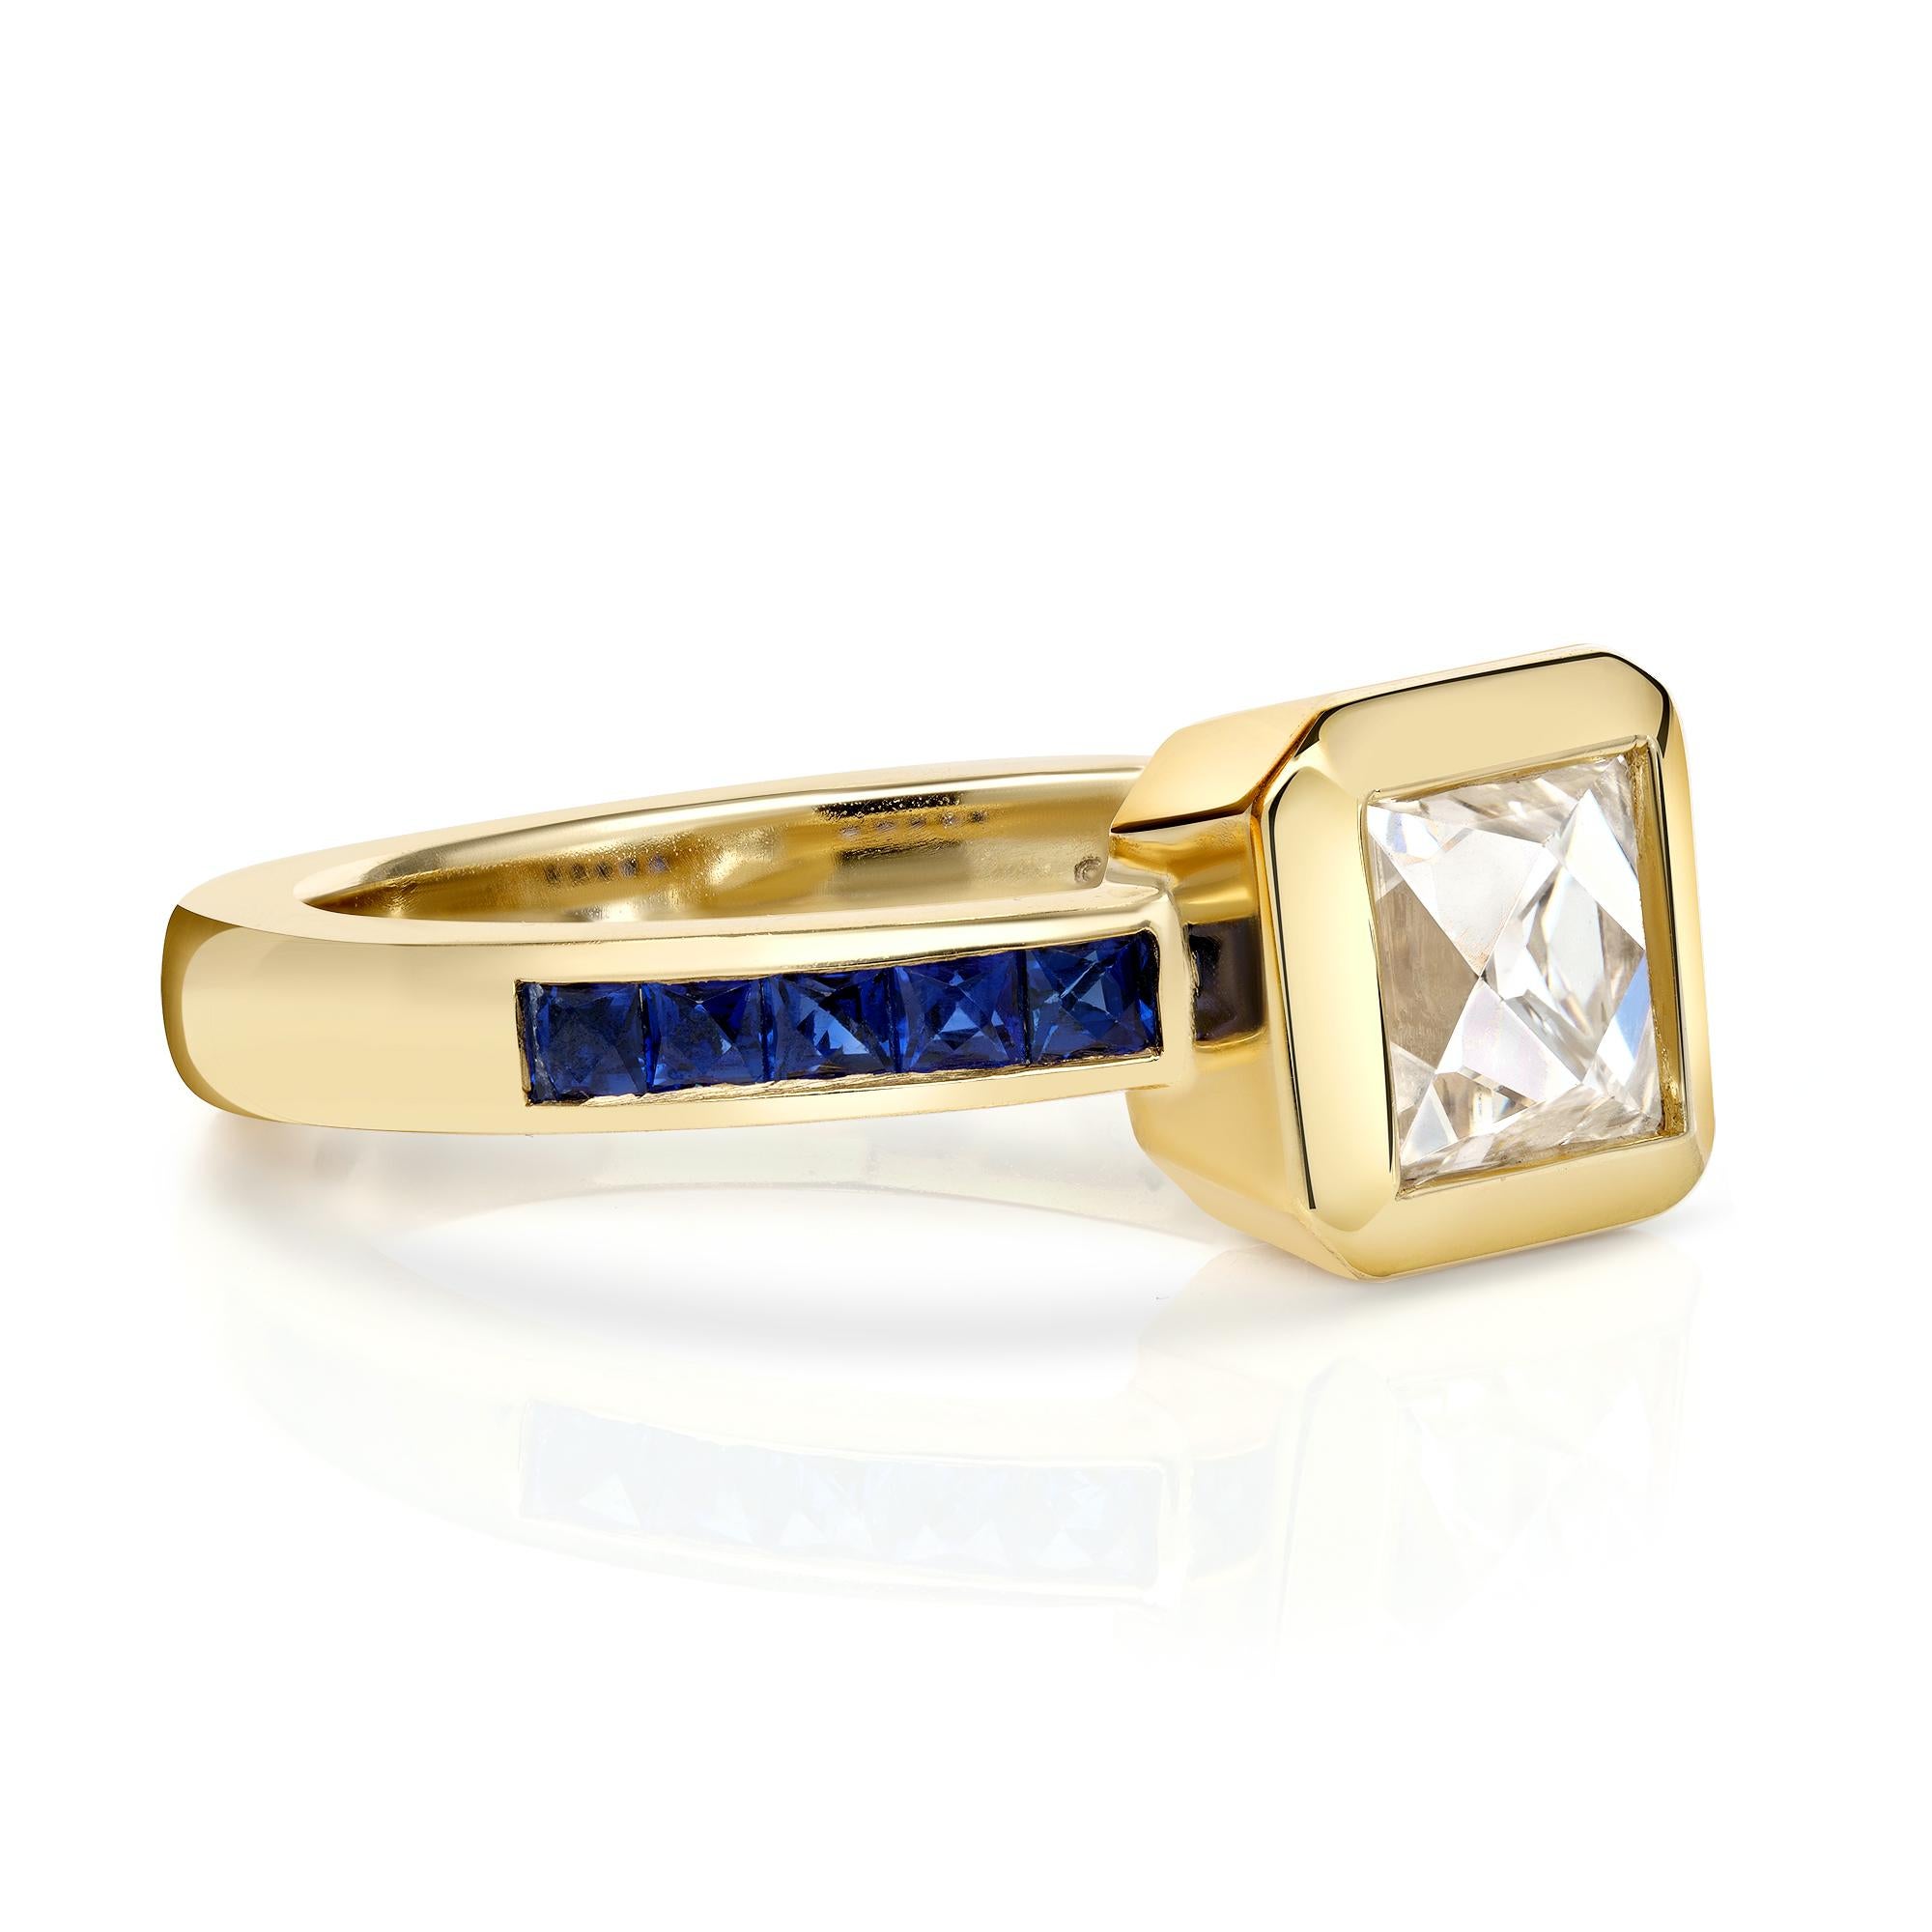 1.15ct K/VS1 GIA certified French cut diamond with 0.39ctw French cut blue sapphire accent stones bezel set in a handcrafted 18K yellow gold mounting.